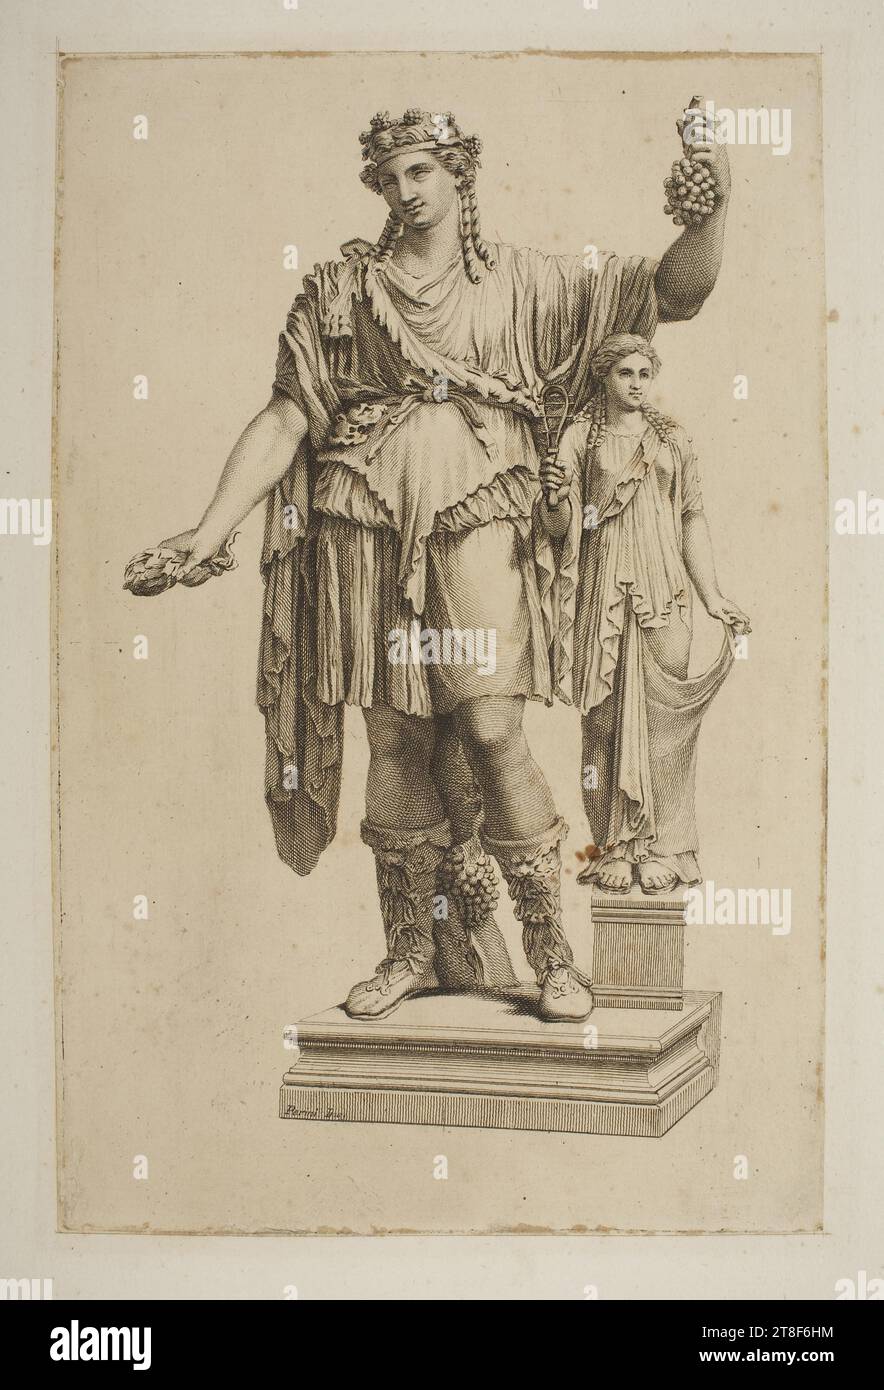 Bacchus with The Goddess of Hope or Spes, Giuseppe Sforza Perini, Presumably 1850, Graphic Art, Etching, Paper, Color, Printer's ink, Etching, Printet, Height (plate size) 300 mm, Height (paper size) 455 mm, Width (plate size) 200 mm, Width (paper size) 370 mm, Perini Inc., Graphic Design, European Stock Photo